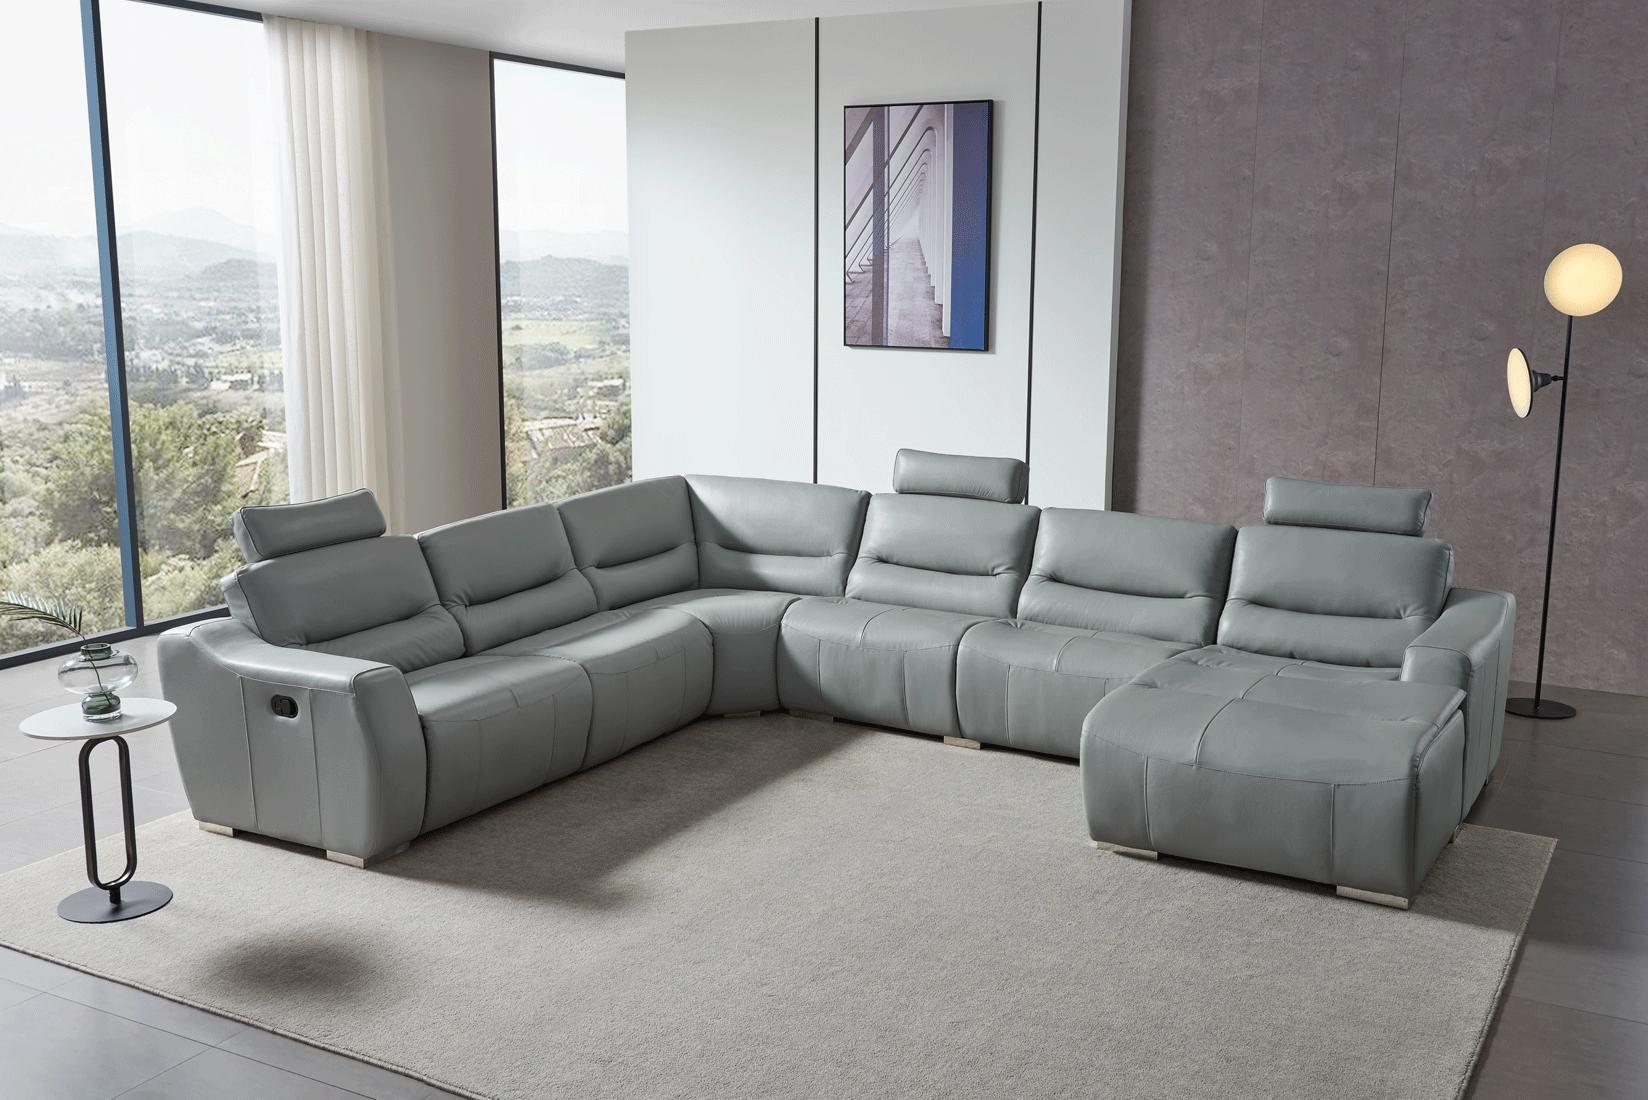 Contemporary, Modern Reclining Sectional 2144 Sectional 2144SECTIONALGREY in Gray Genuine Leather